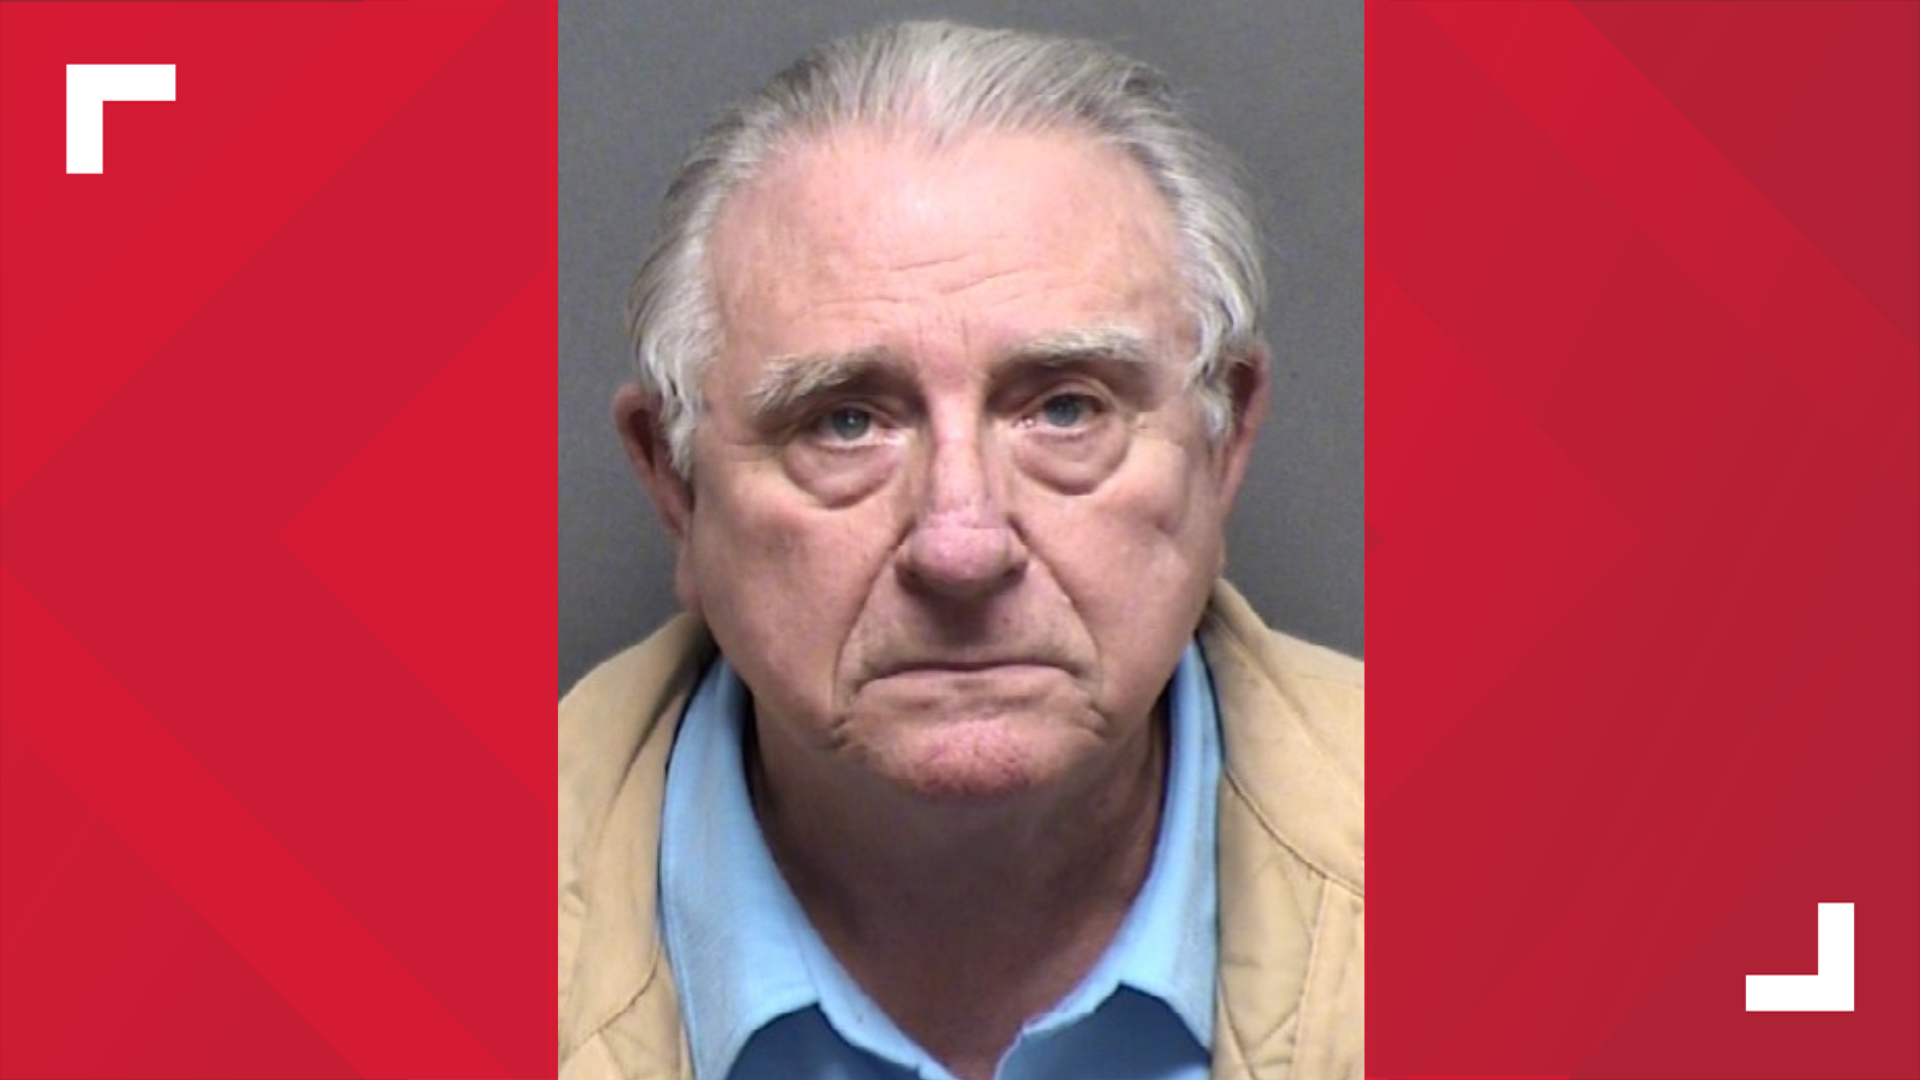 76-year-old man sentenced to 80 years in prison in connection to state, federal child sex charges kens5